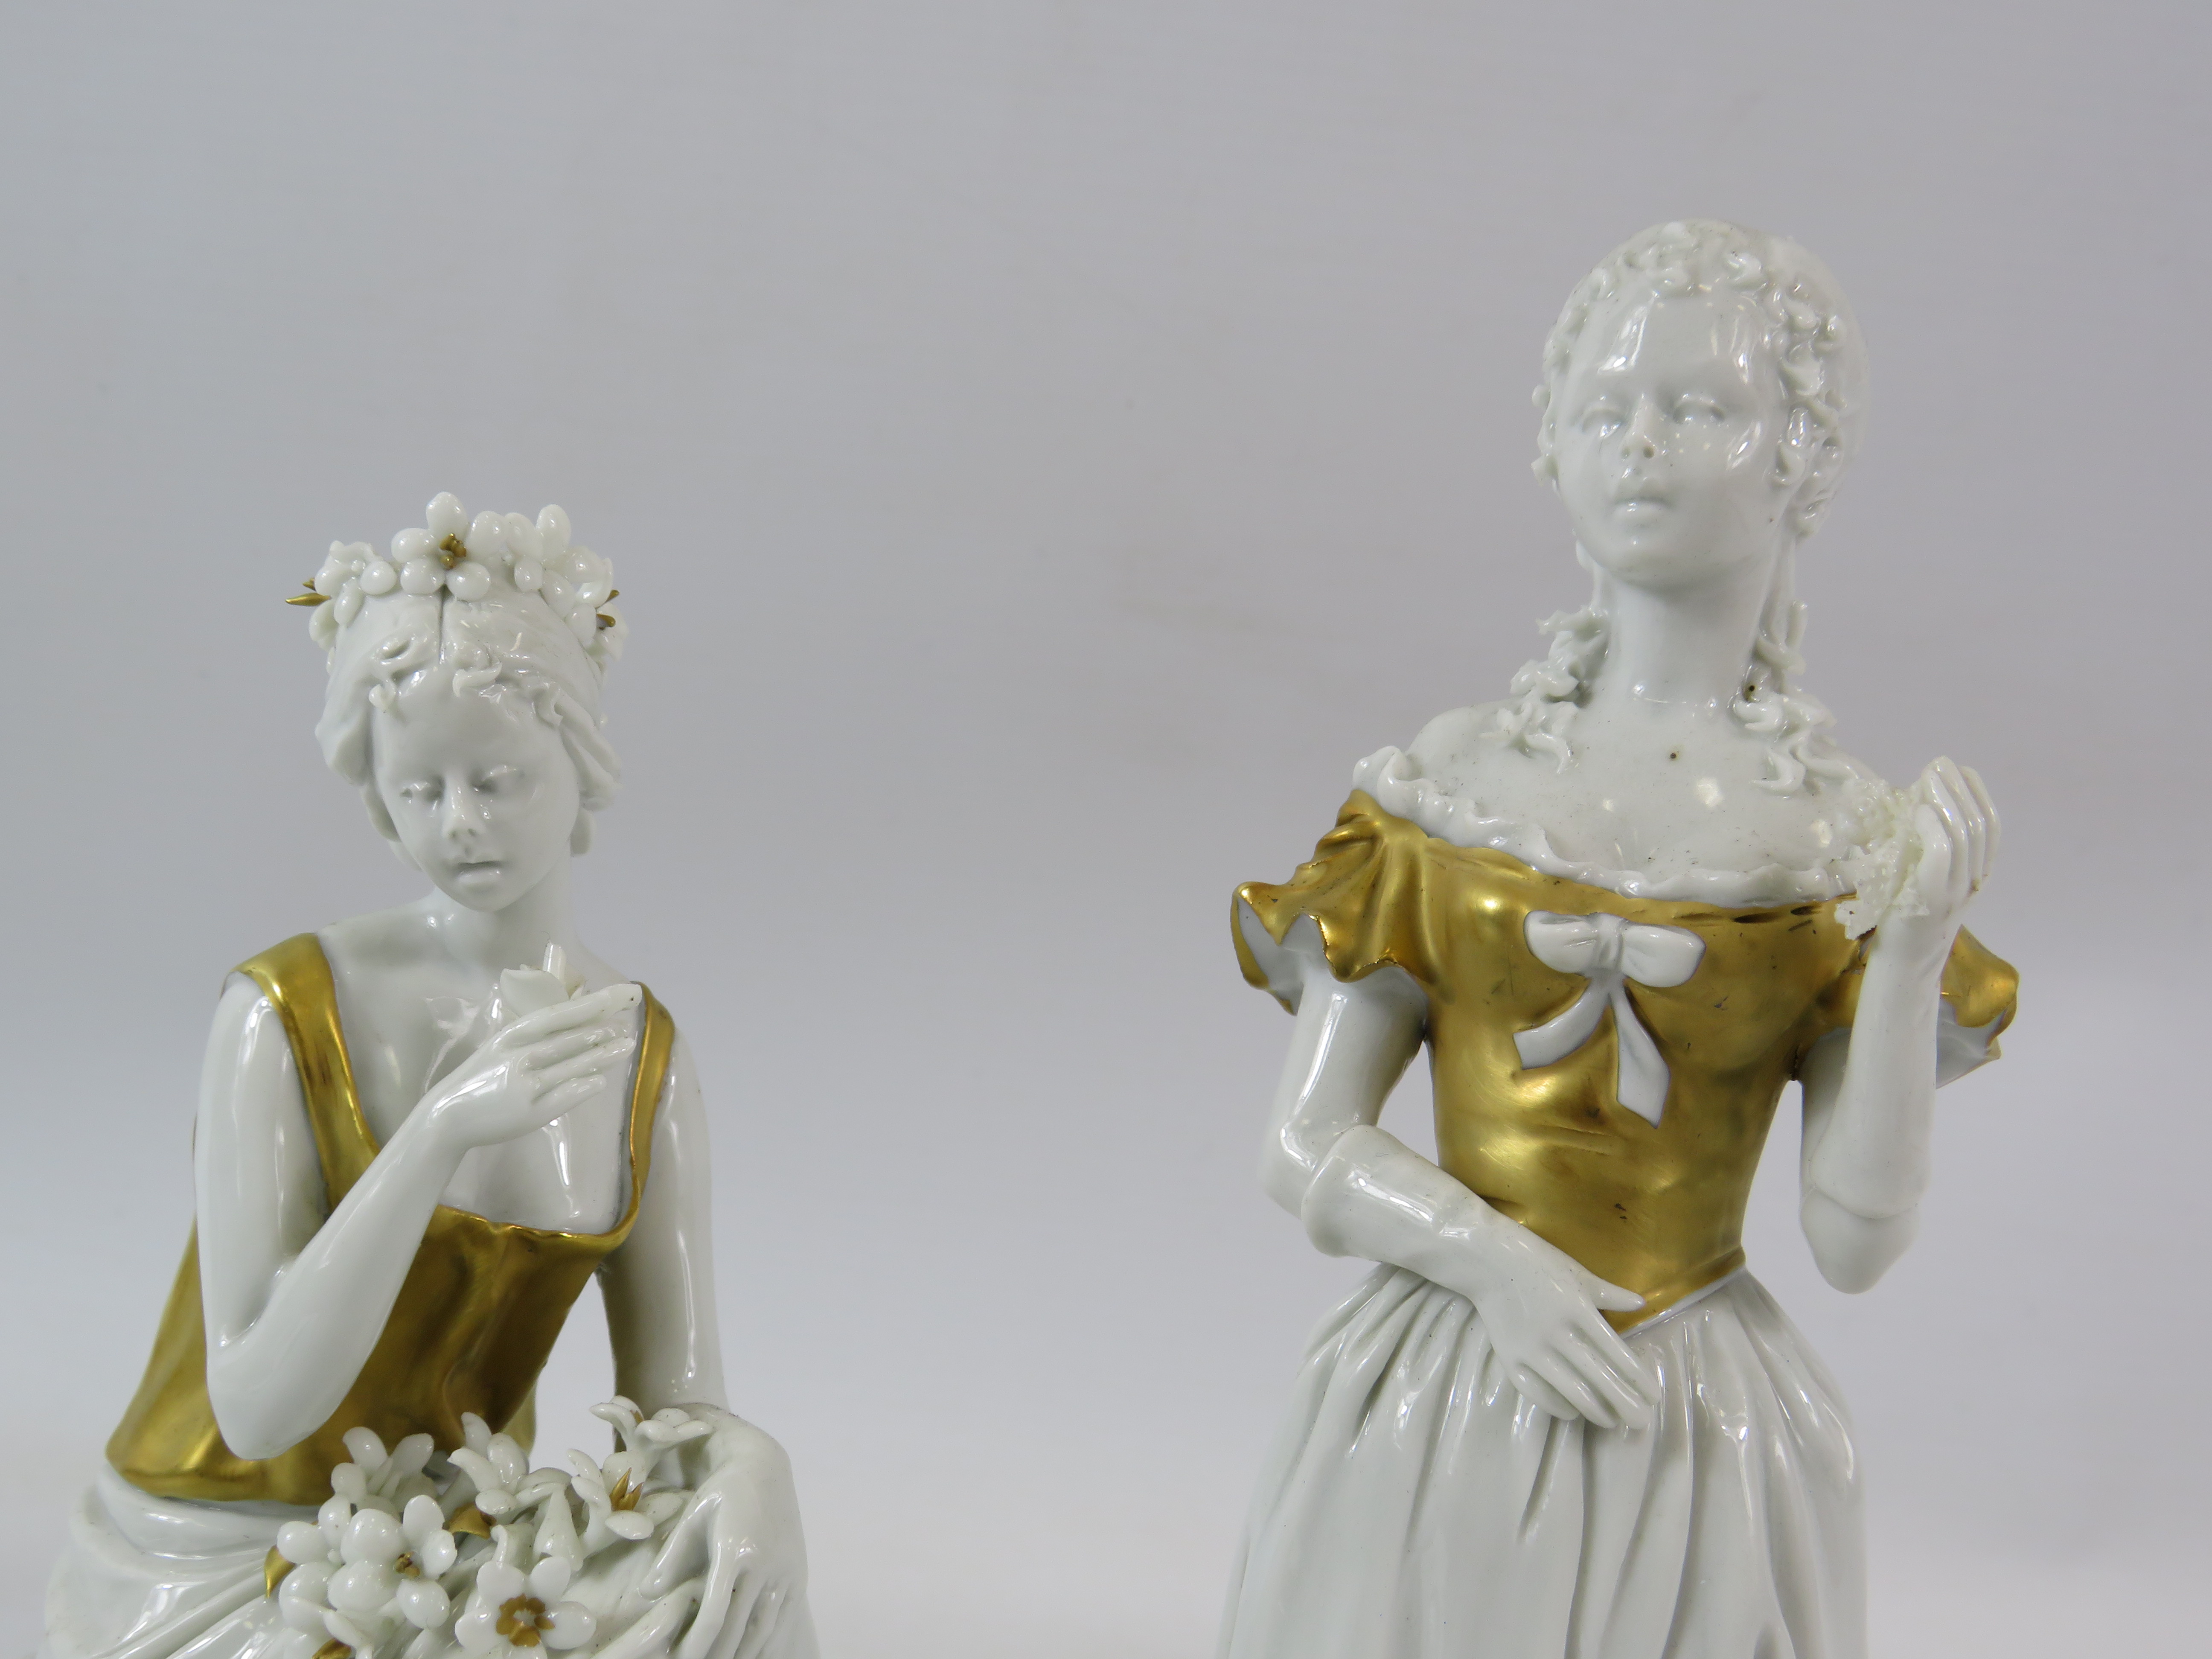 2 Signed Capodimonte white and gold porcelain figurines, the tallest measures 22cm. - Image 2 of 4